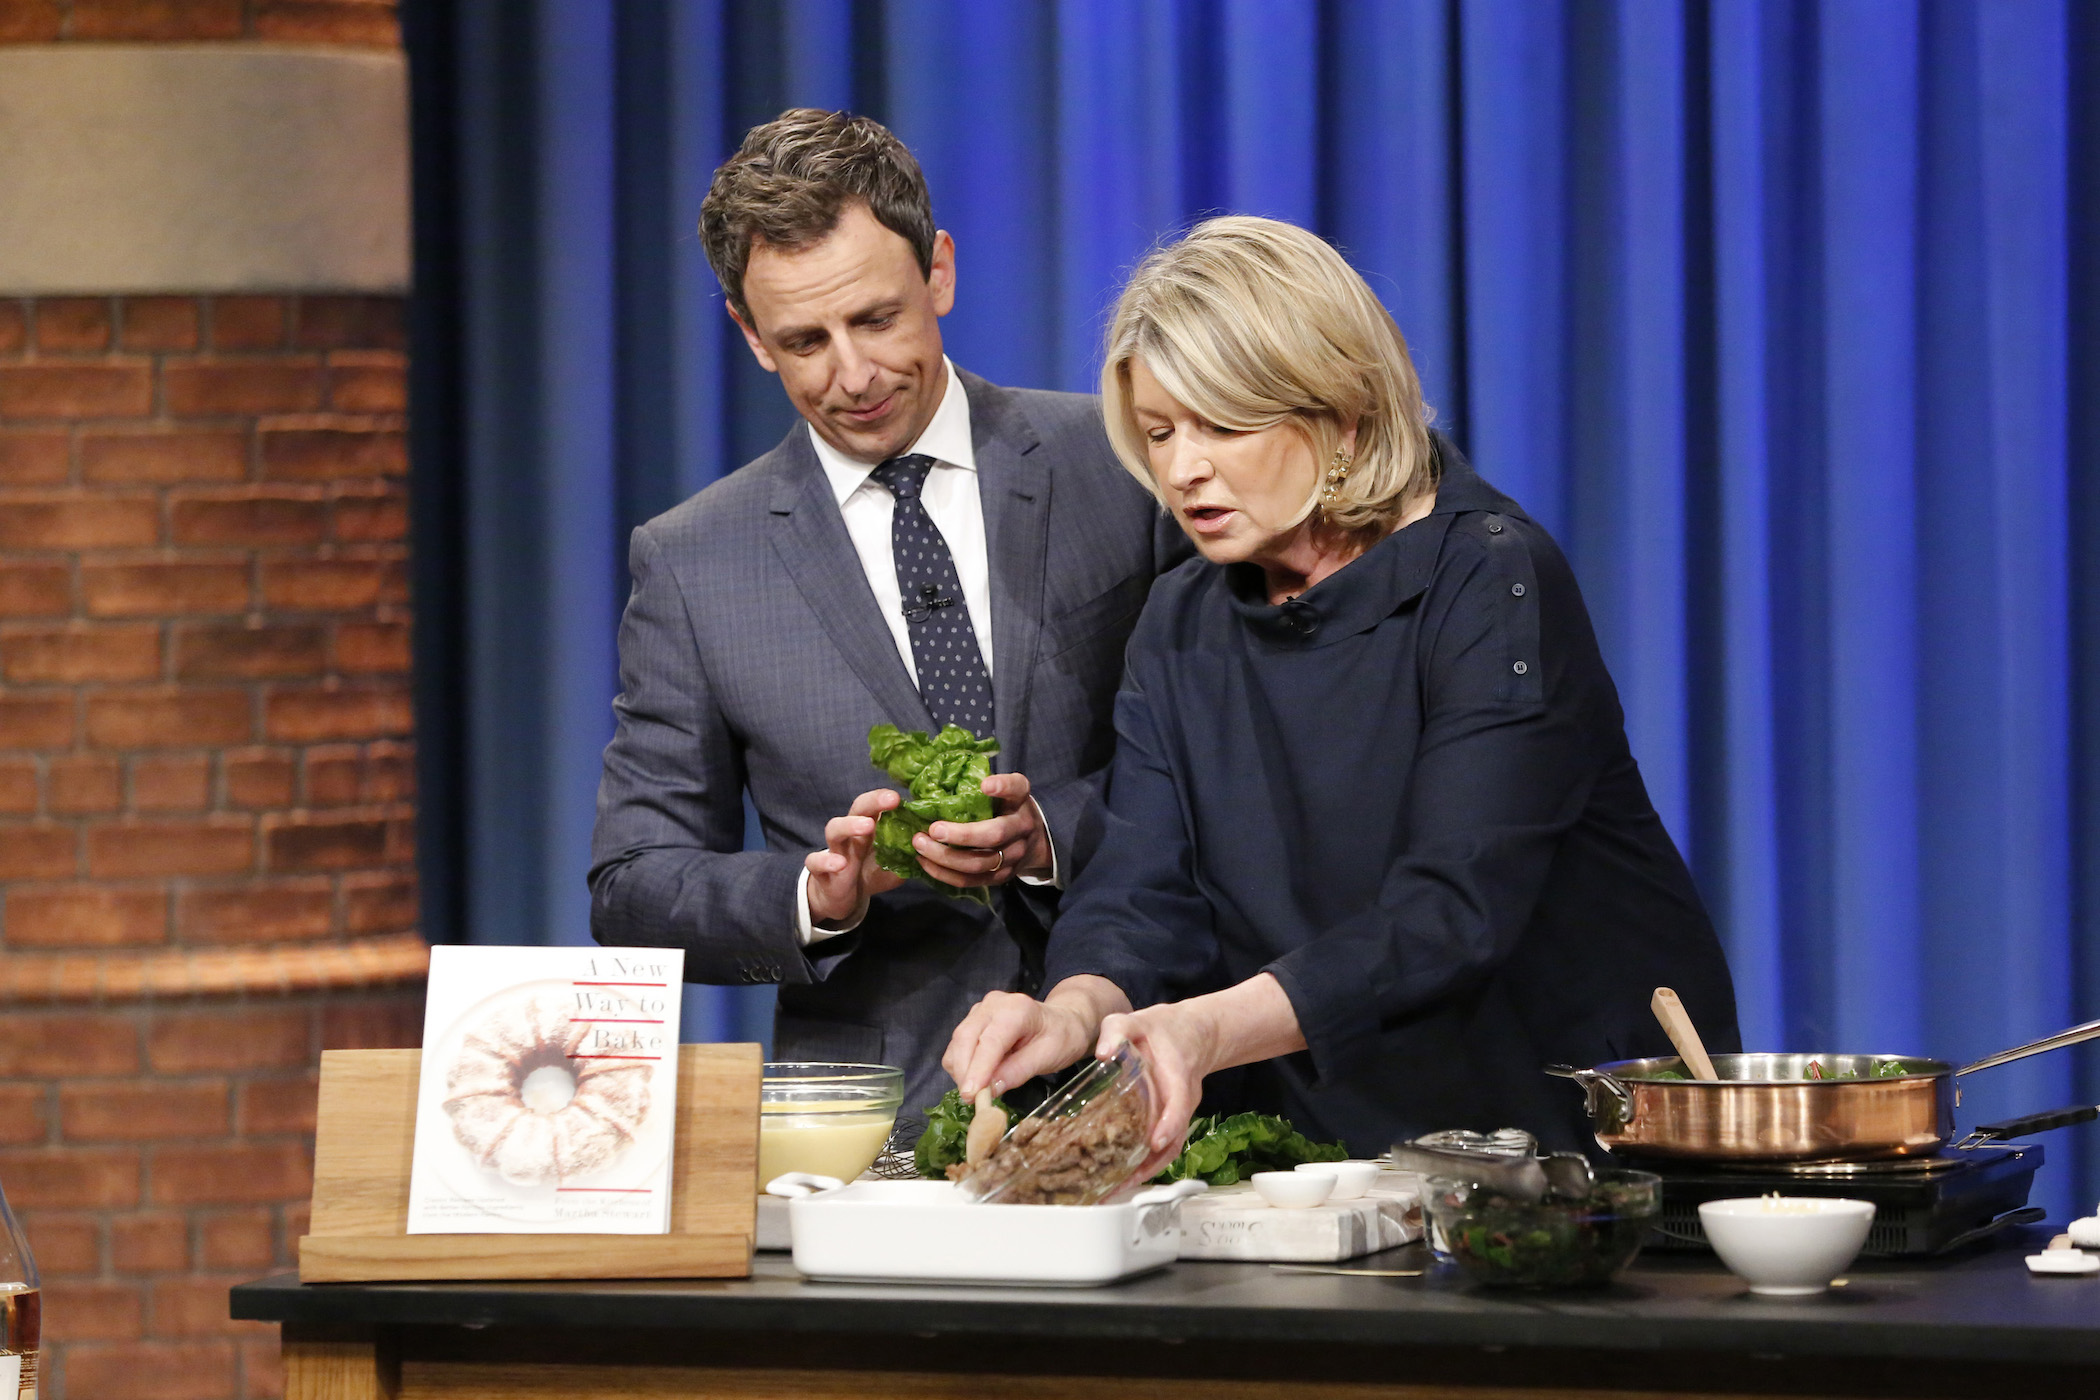 'Late Night' host Seth Meyers helping Martha Stewart cook her recipe on the show